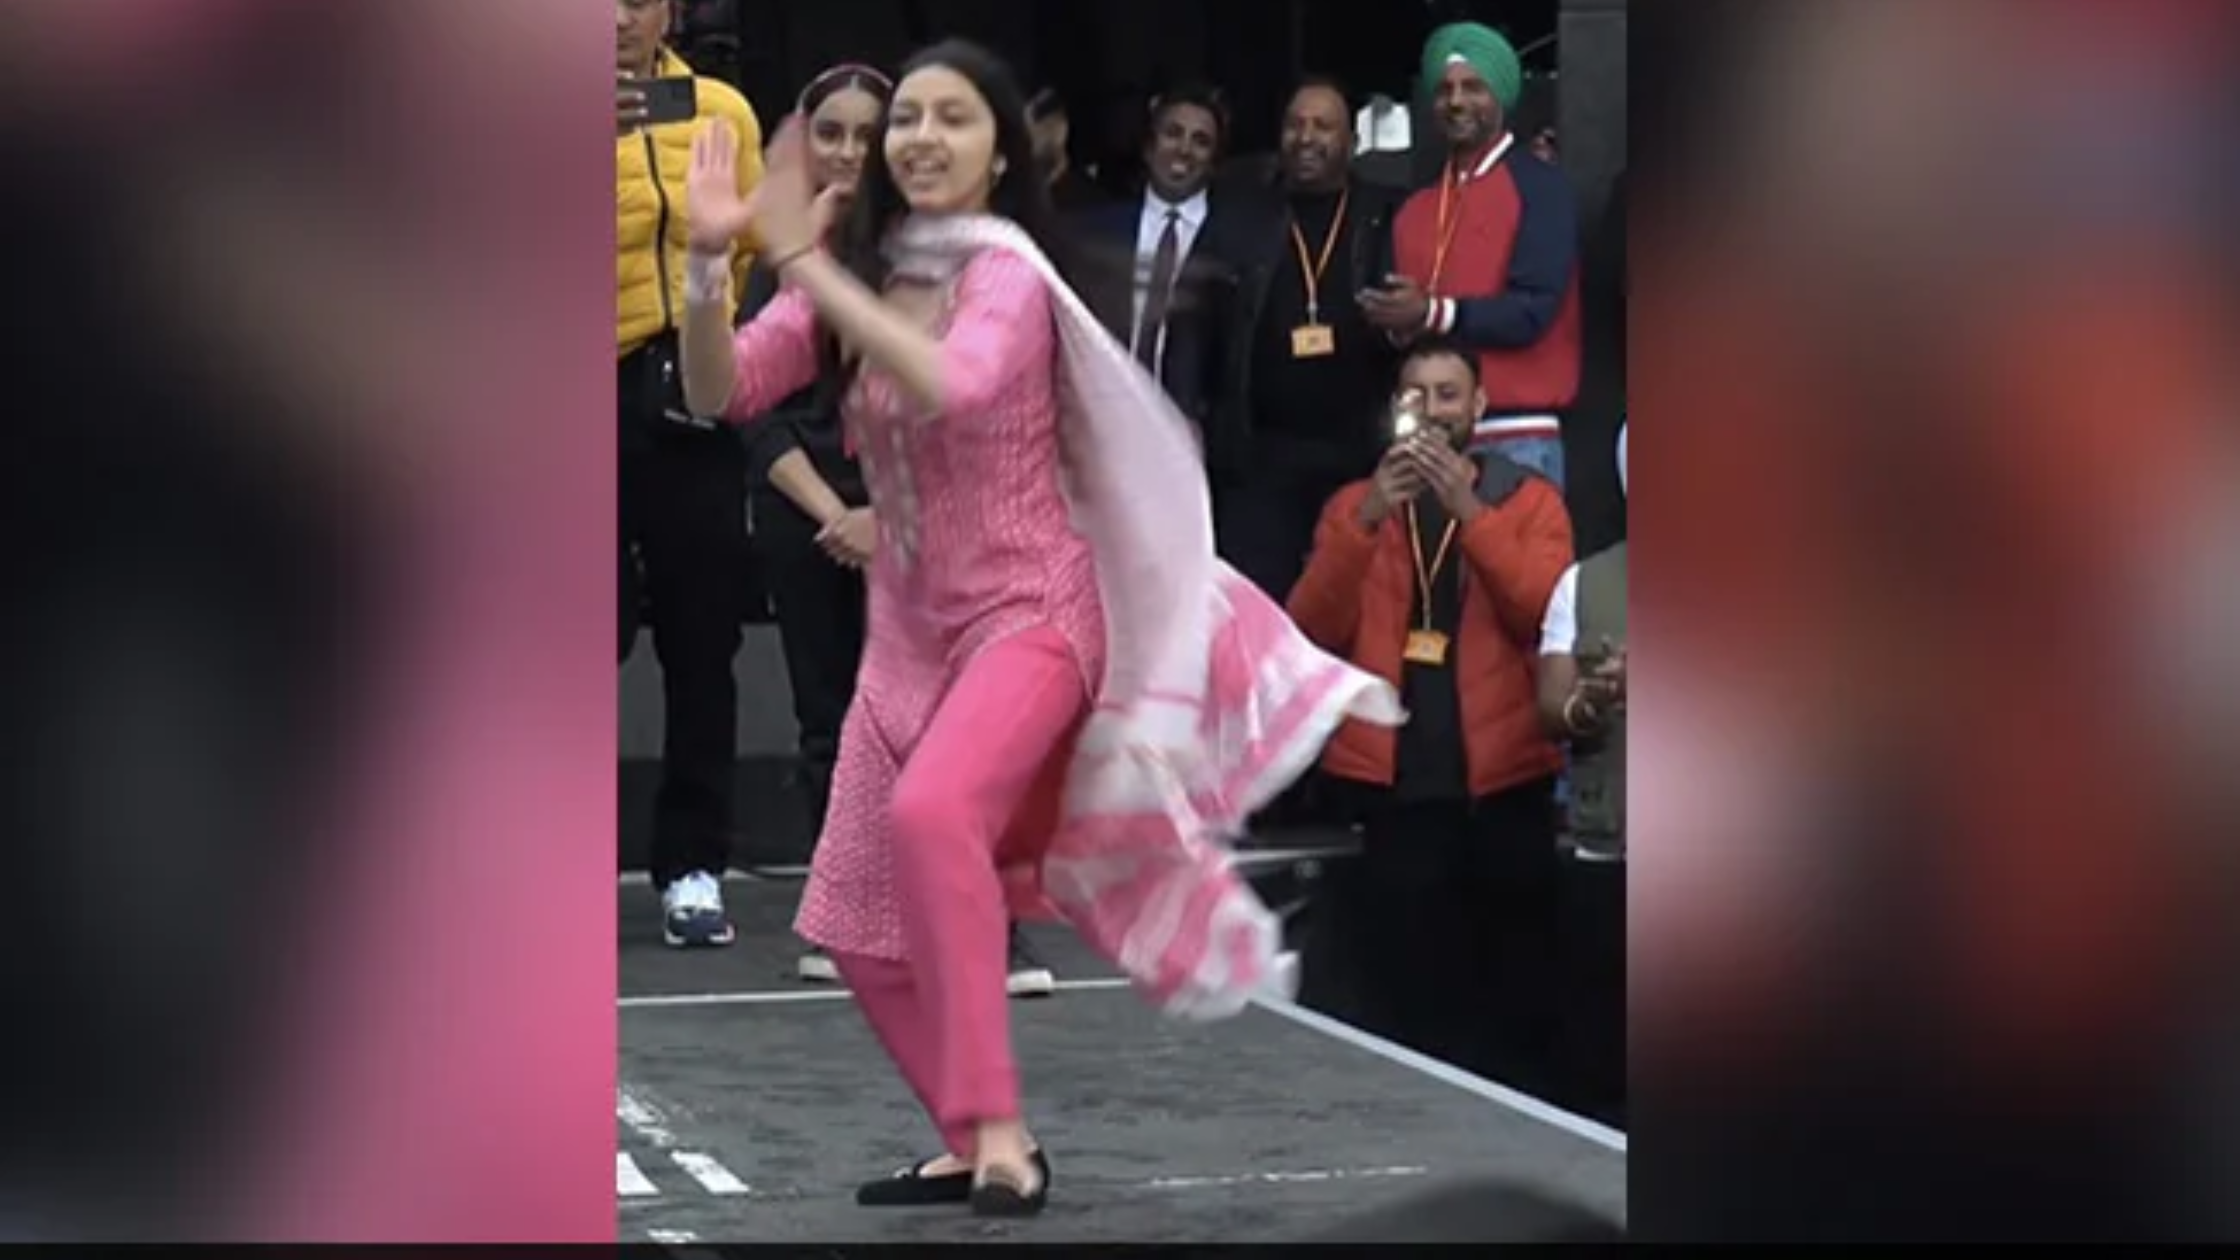 VIDEO: A full market girl did such a dance, people started watching while standing